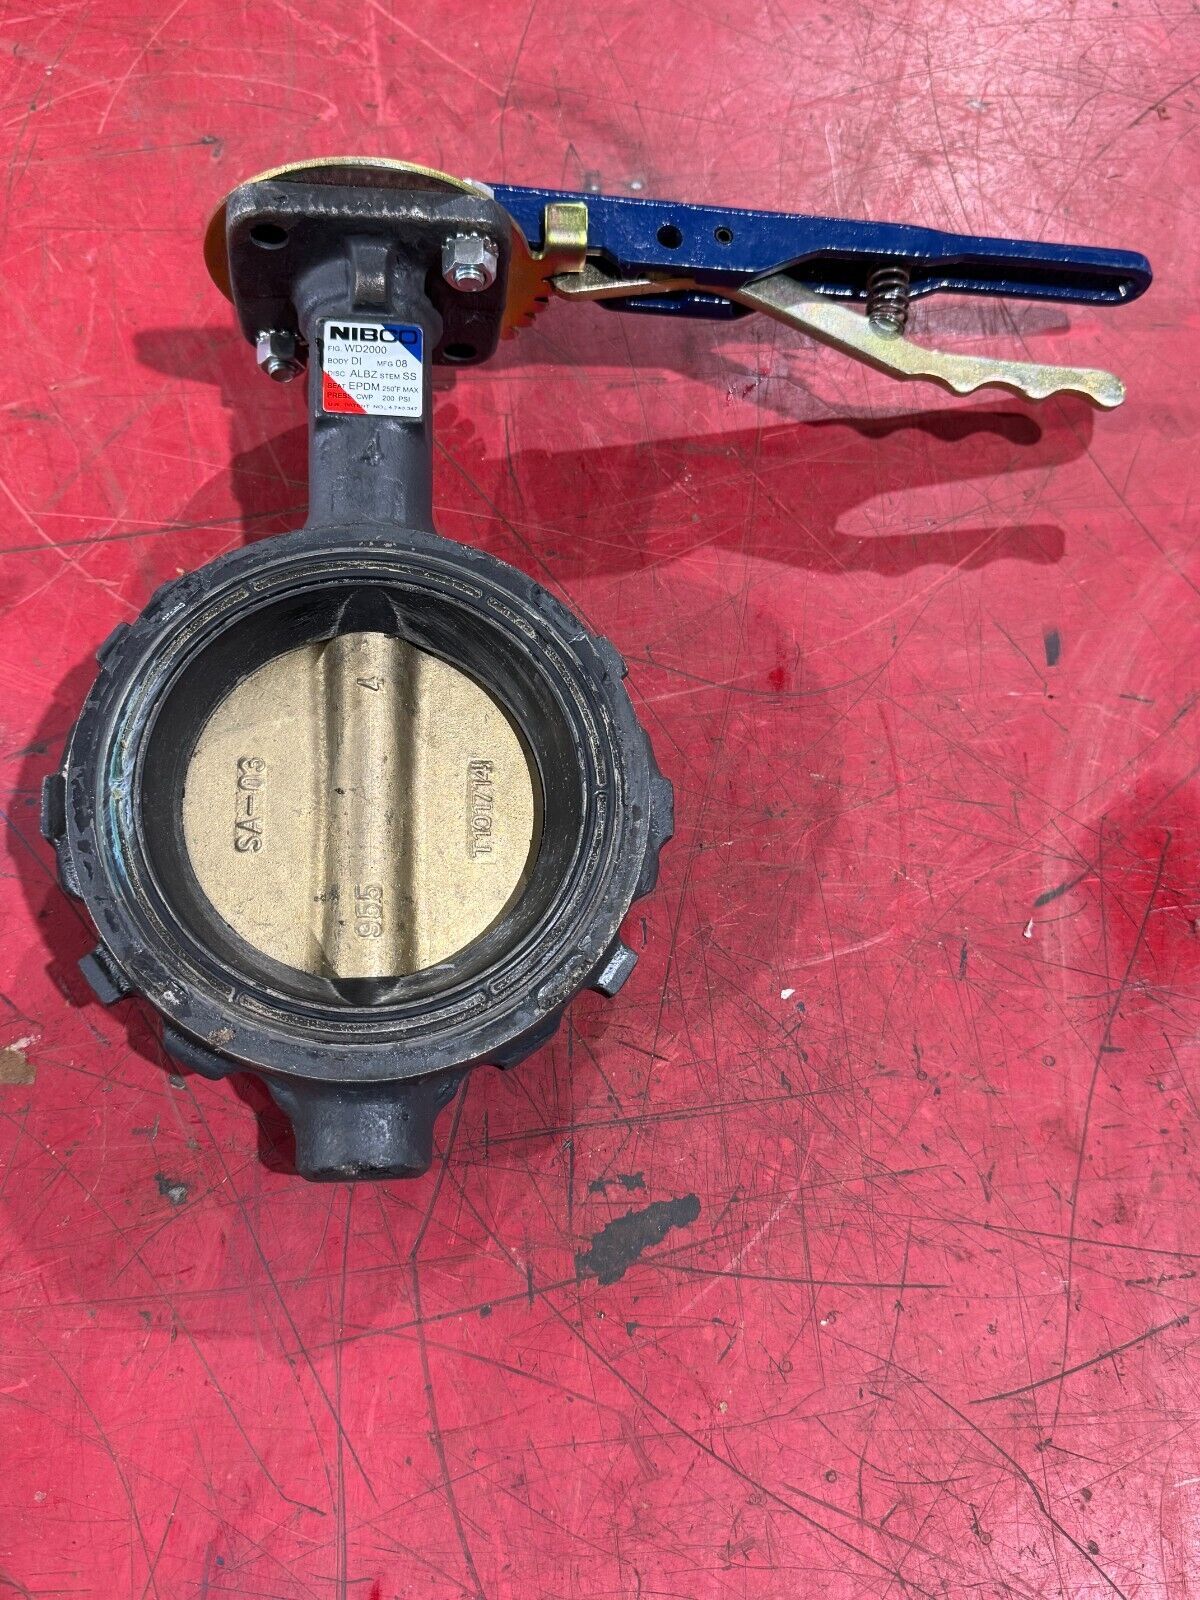 NEW NIBCO 4" BUTTERFLY VALVE WD2000 PRESS. CWP 200PSI.